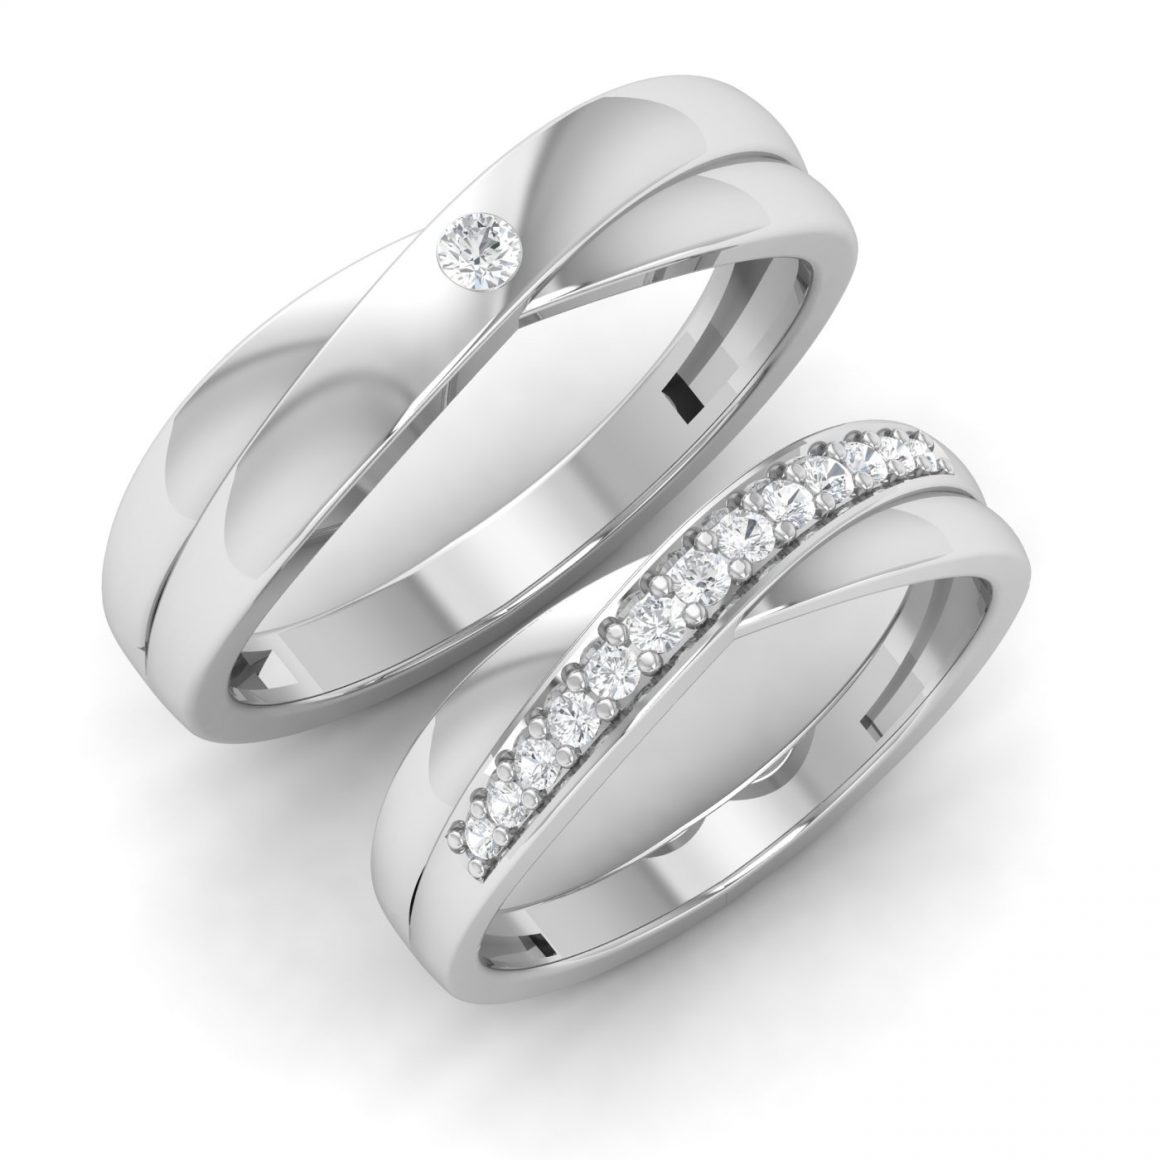 Engagement ring guide | Couples band | engagement ring